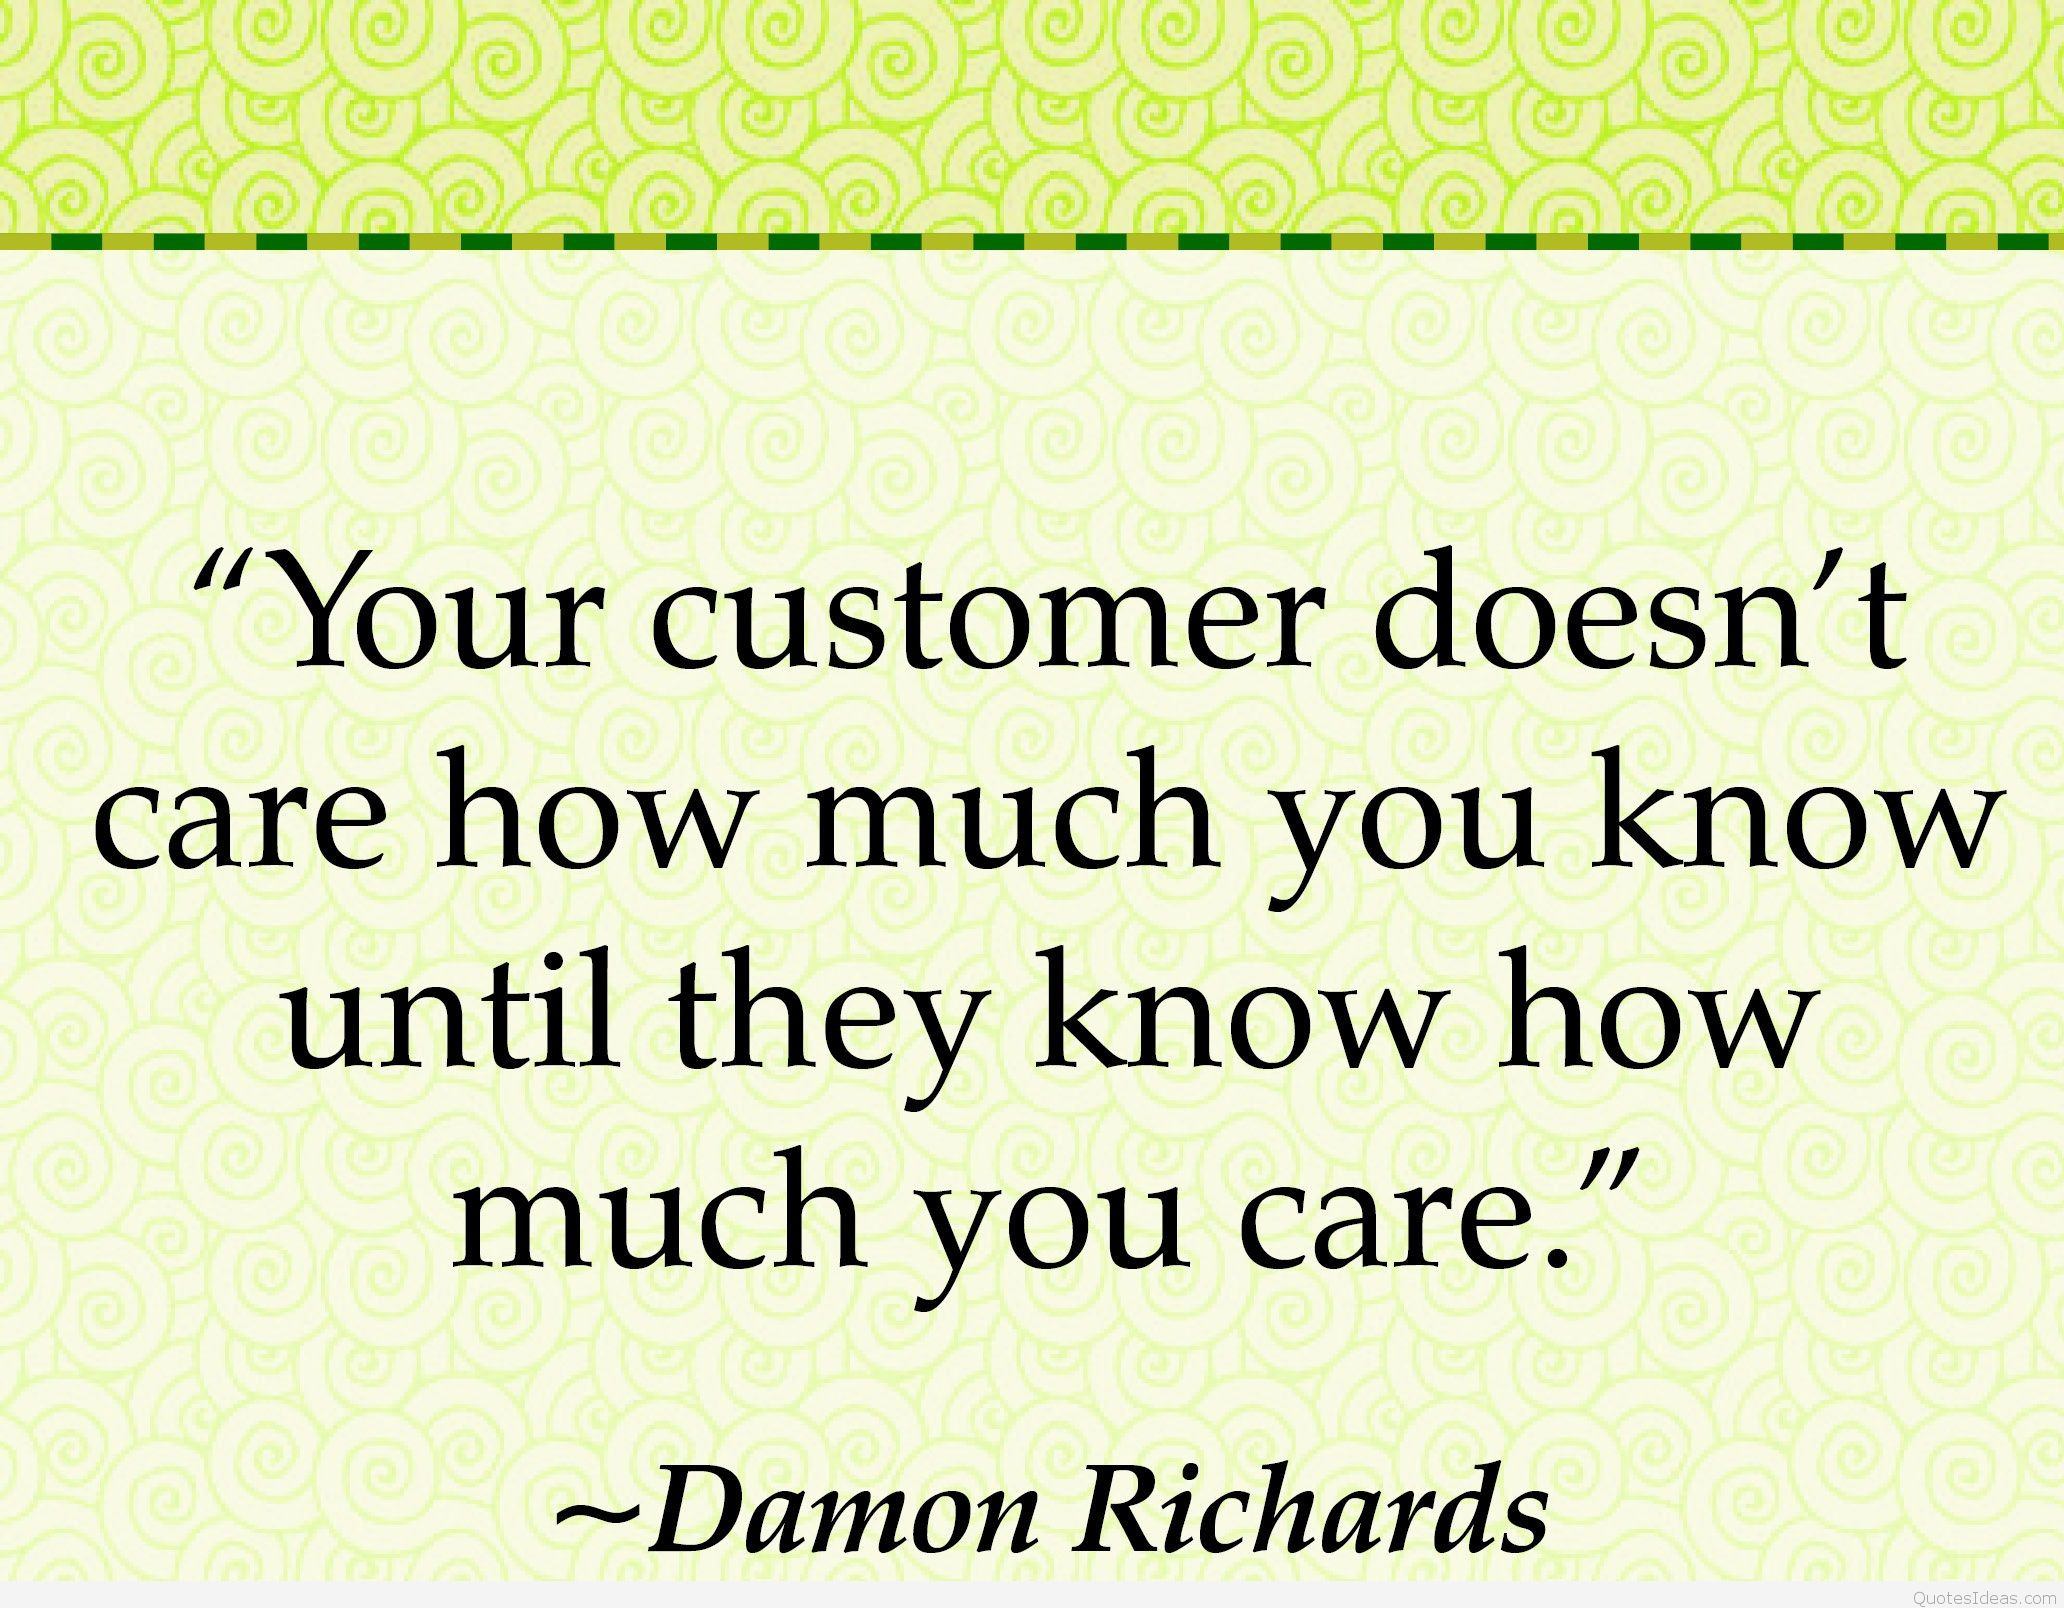 Positive Customer Service Quotes
 Customer service sayings quotes images